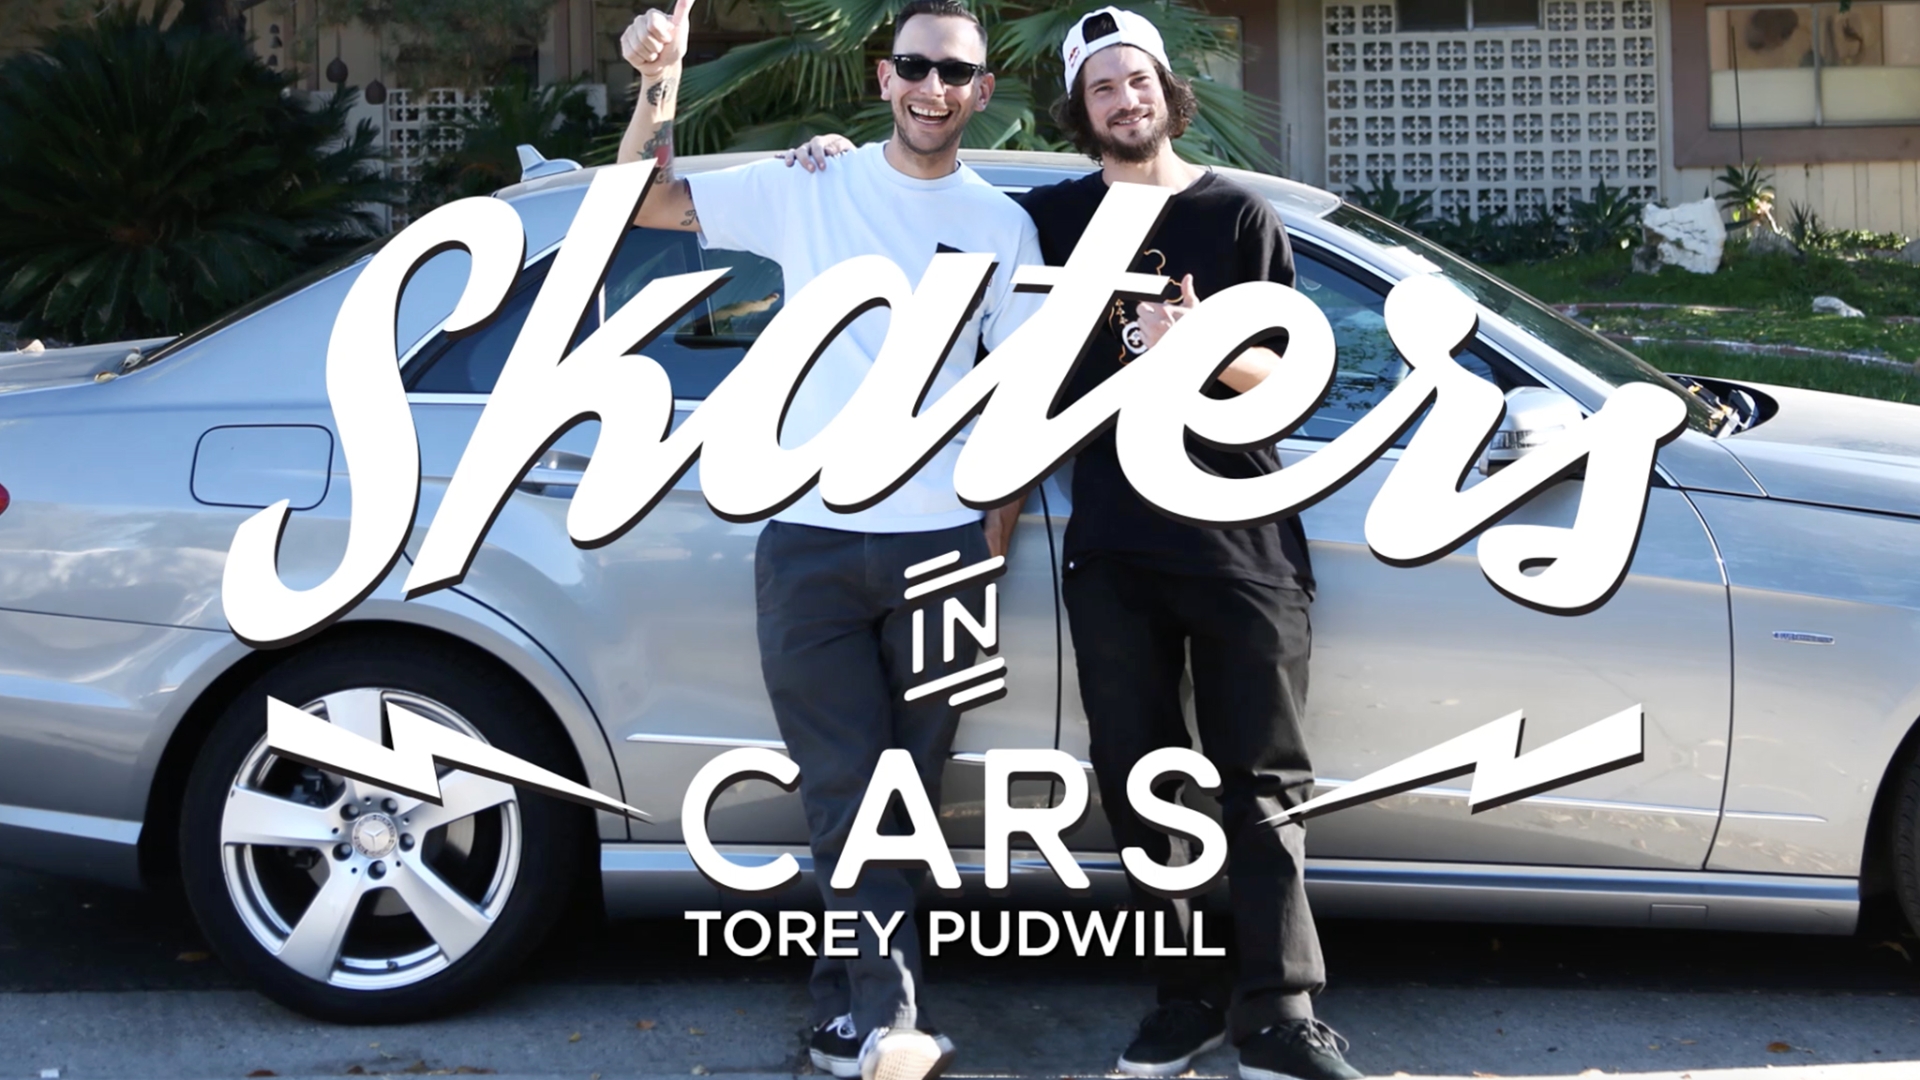 Skaters In Cars Looking At Spots: Torey Pudwill